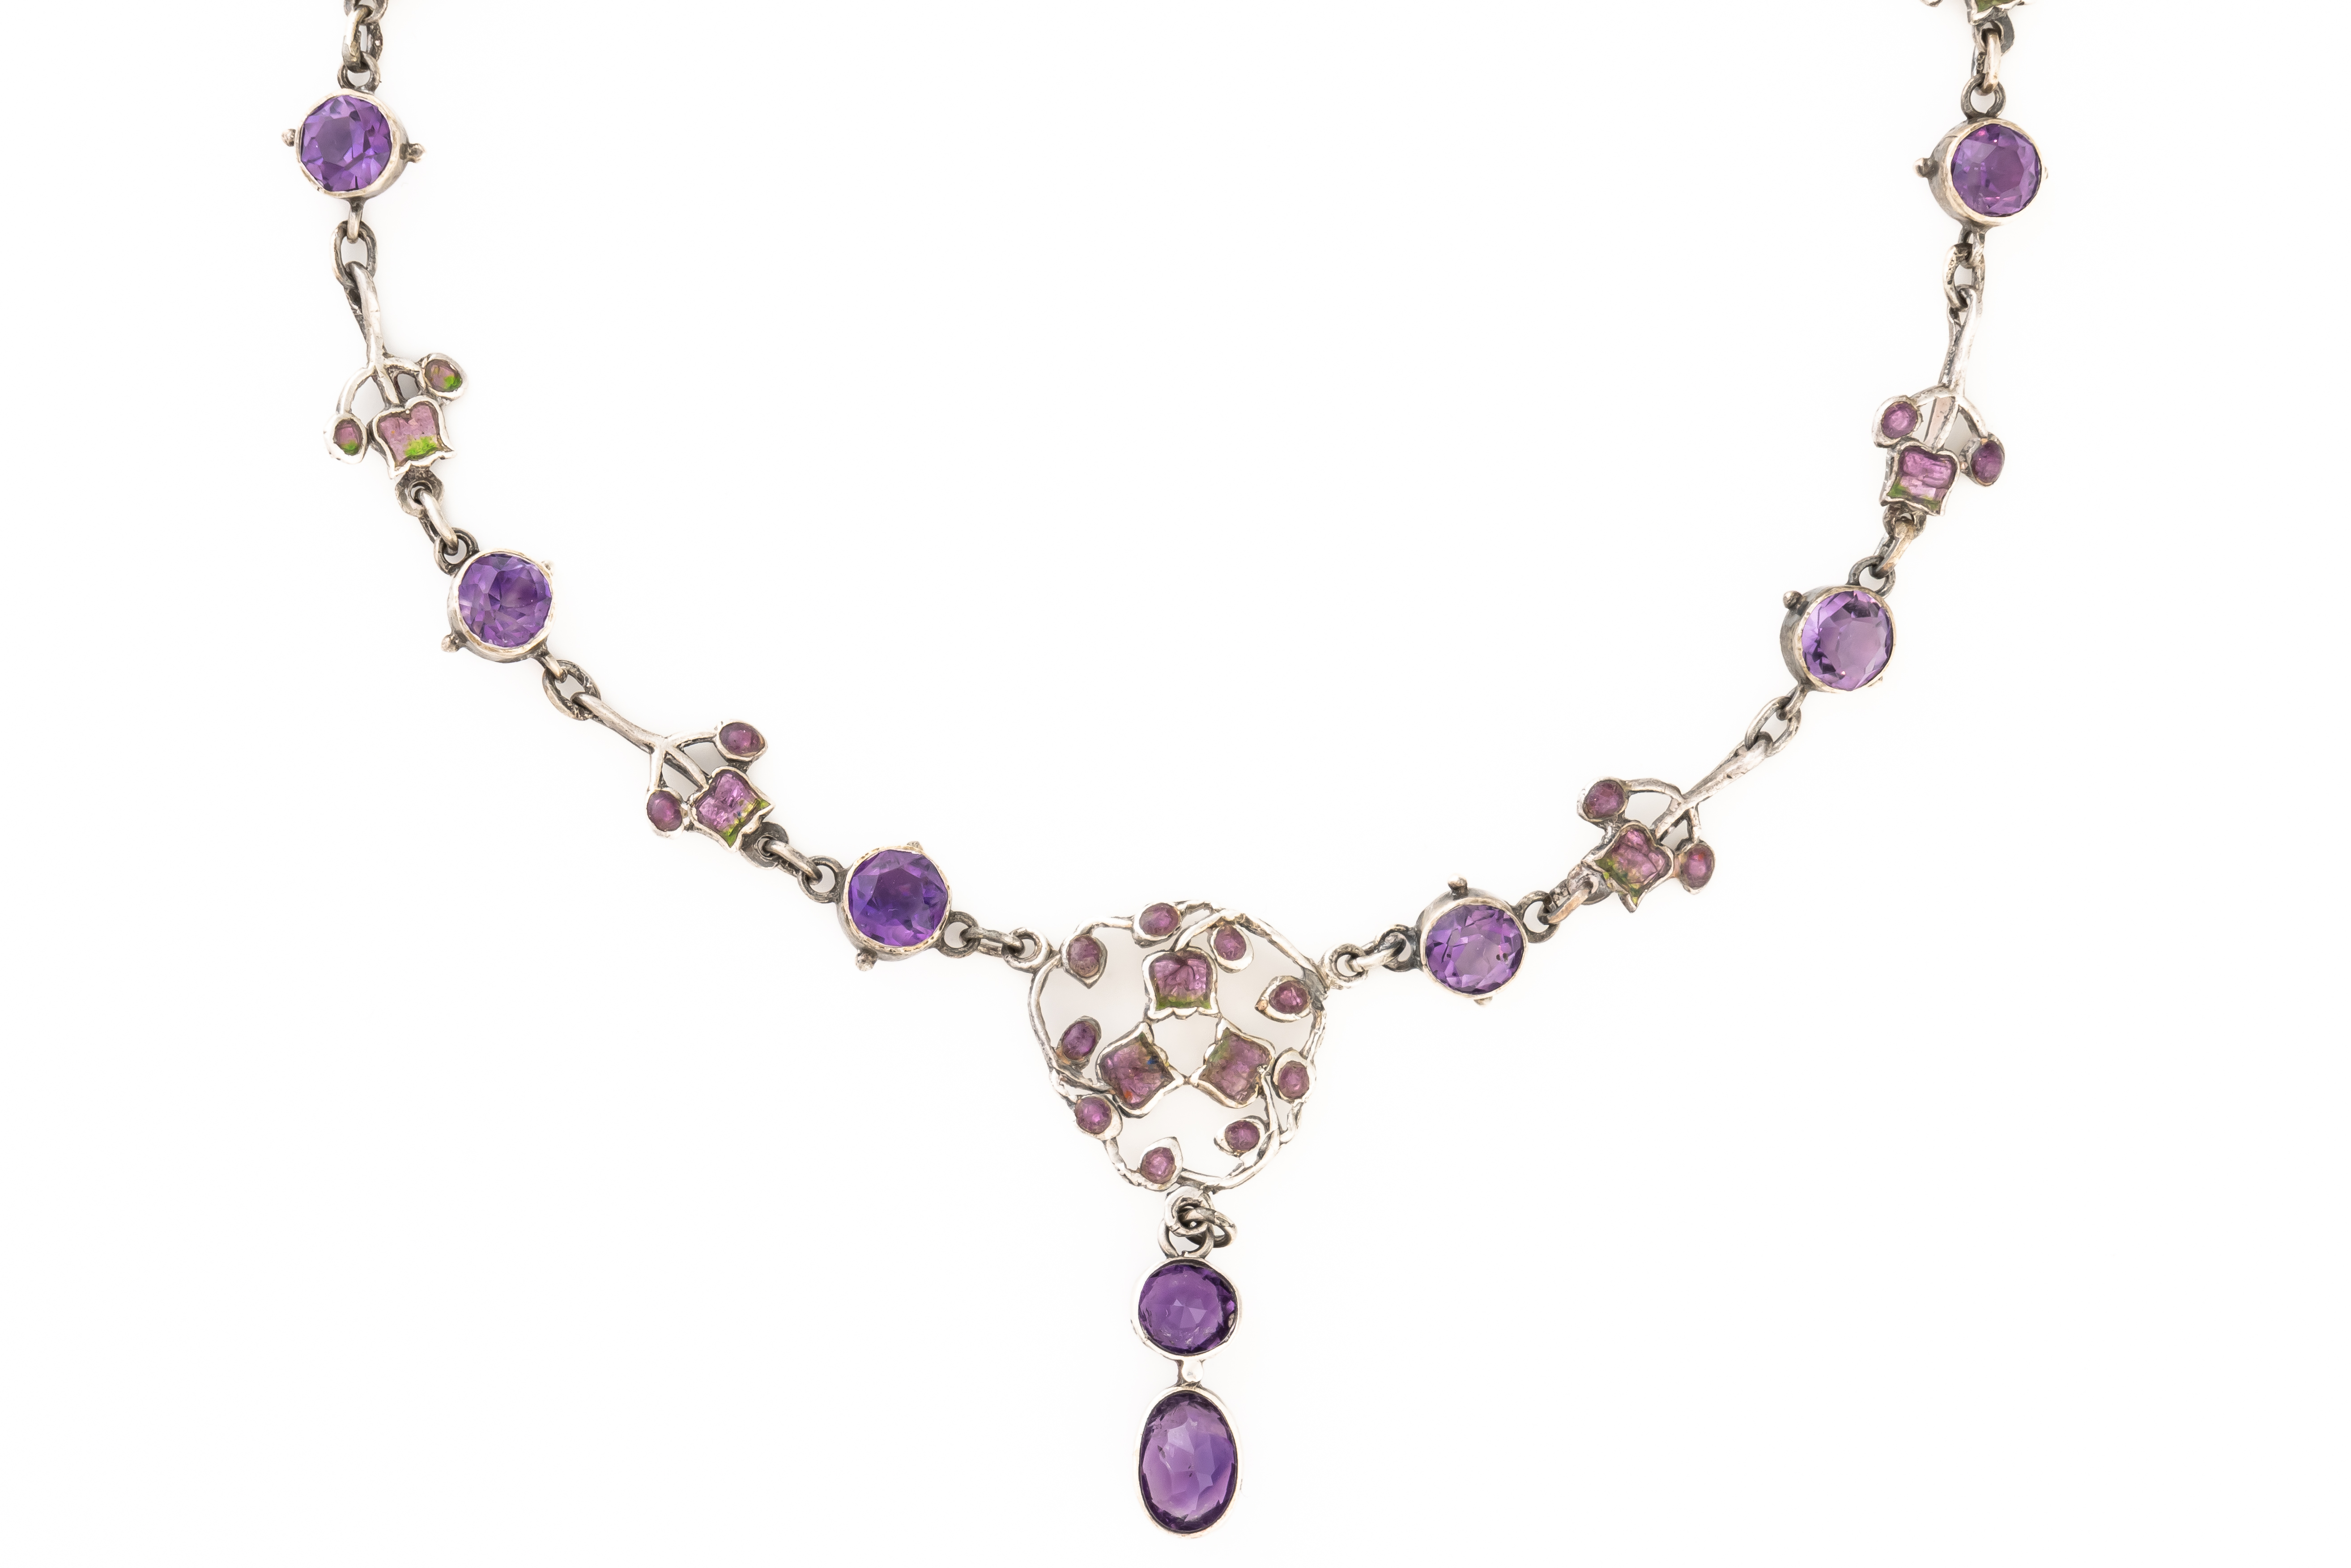 LIBERTY & CO: A SILVER, AMETHYST AND ENAMEL PENDANT NECKLACE